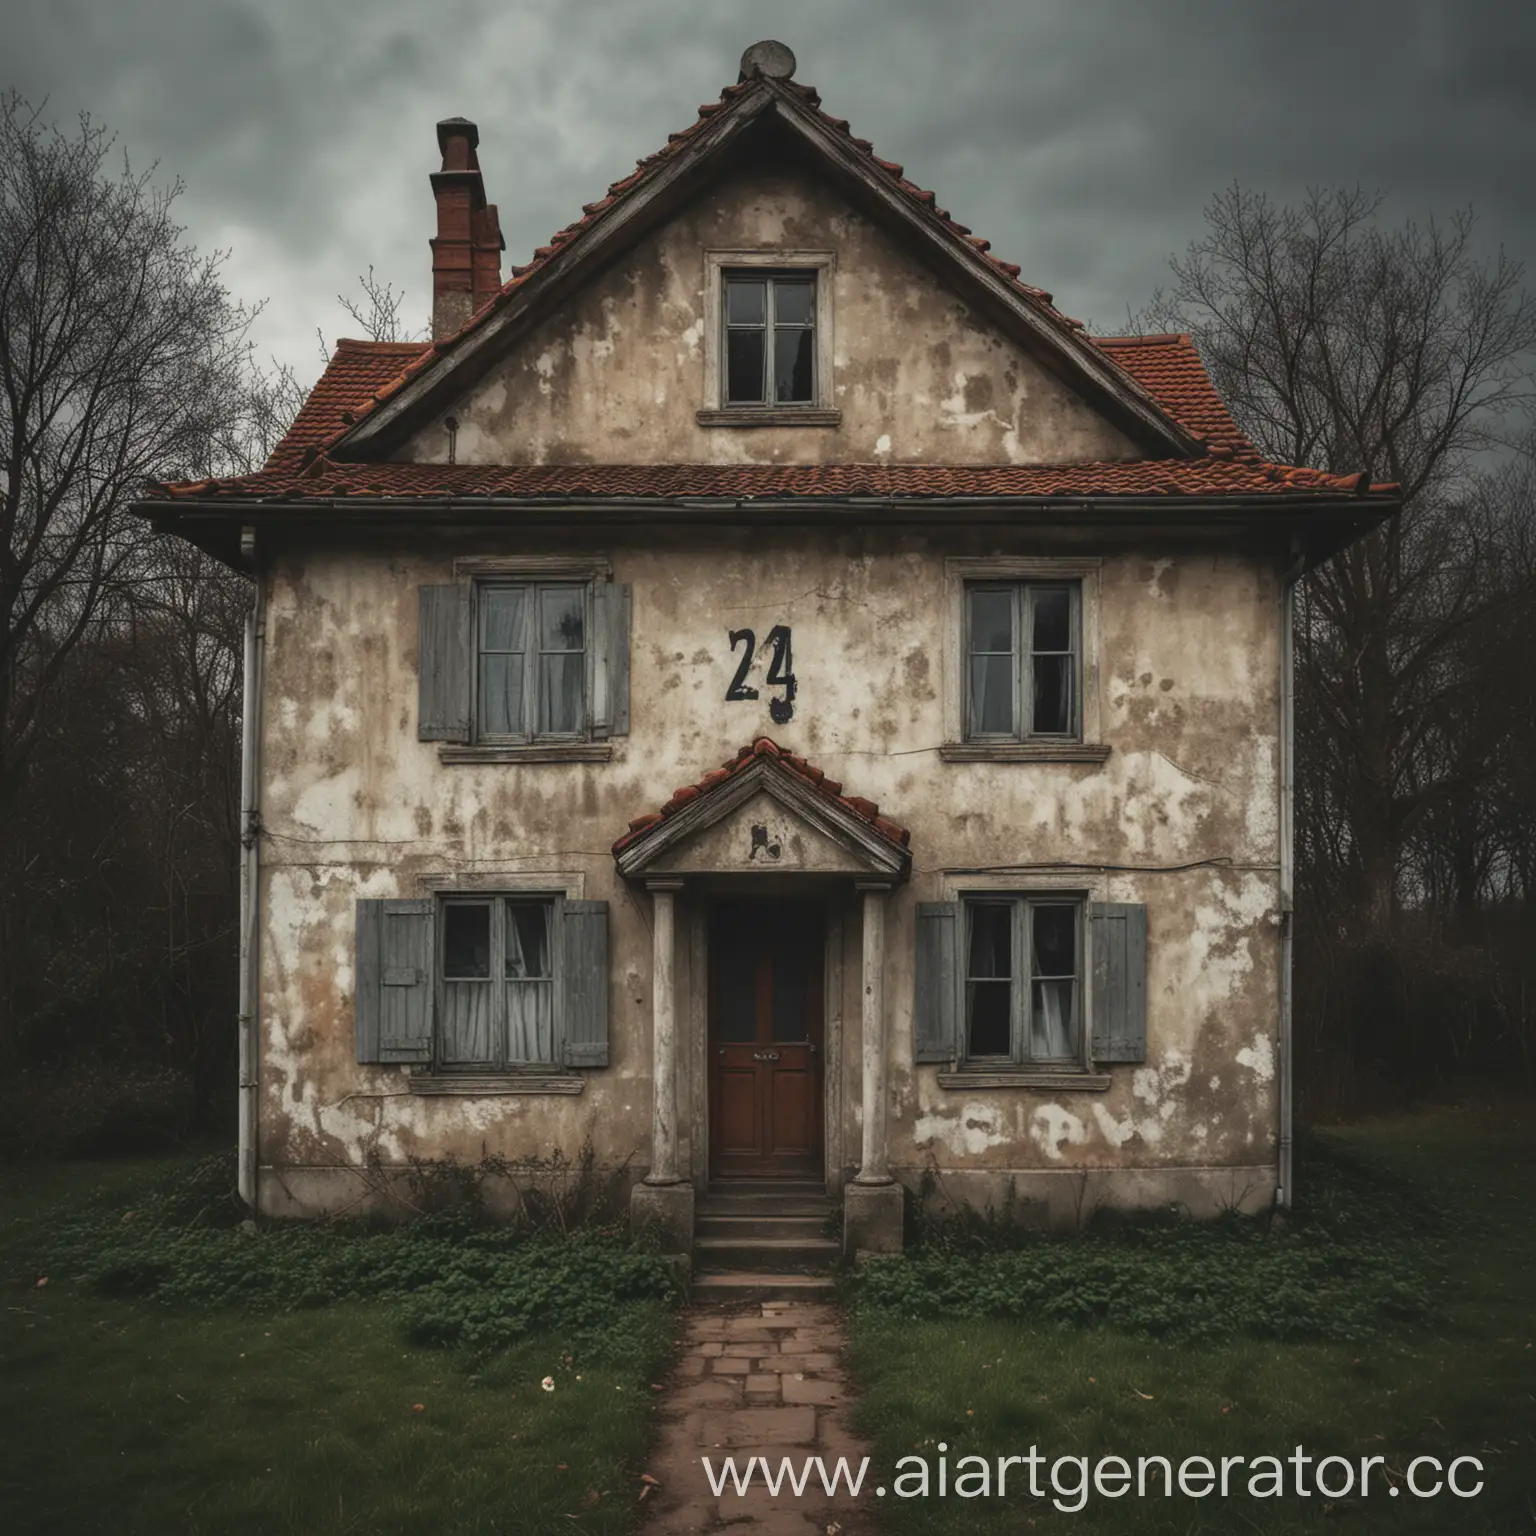 Mysterious-Old-House-with-Hidden-Numbers